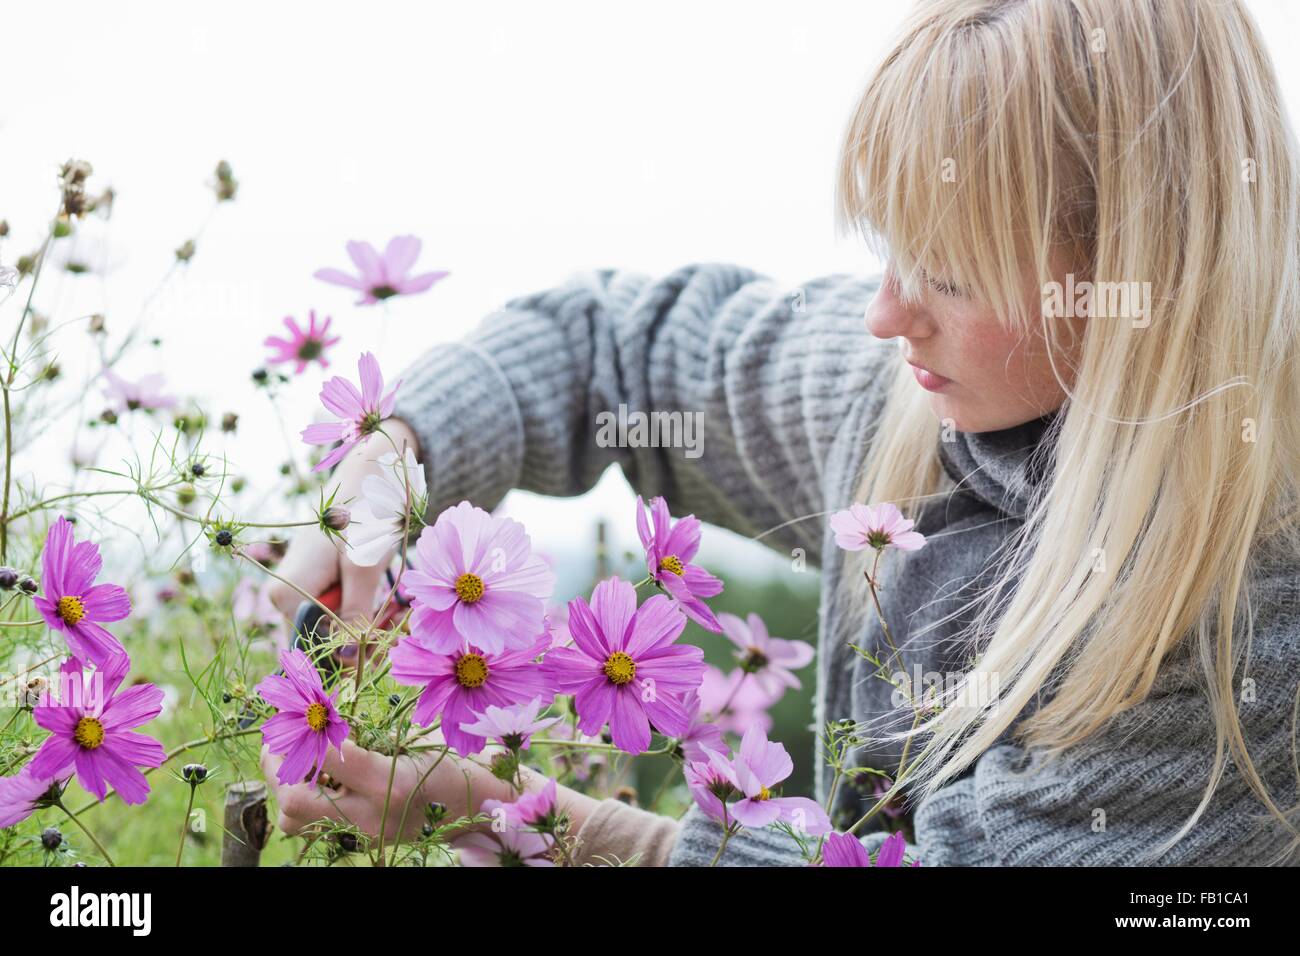 Mid adult woman cutting organic flowers in garden Stock Photo